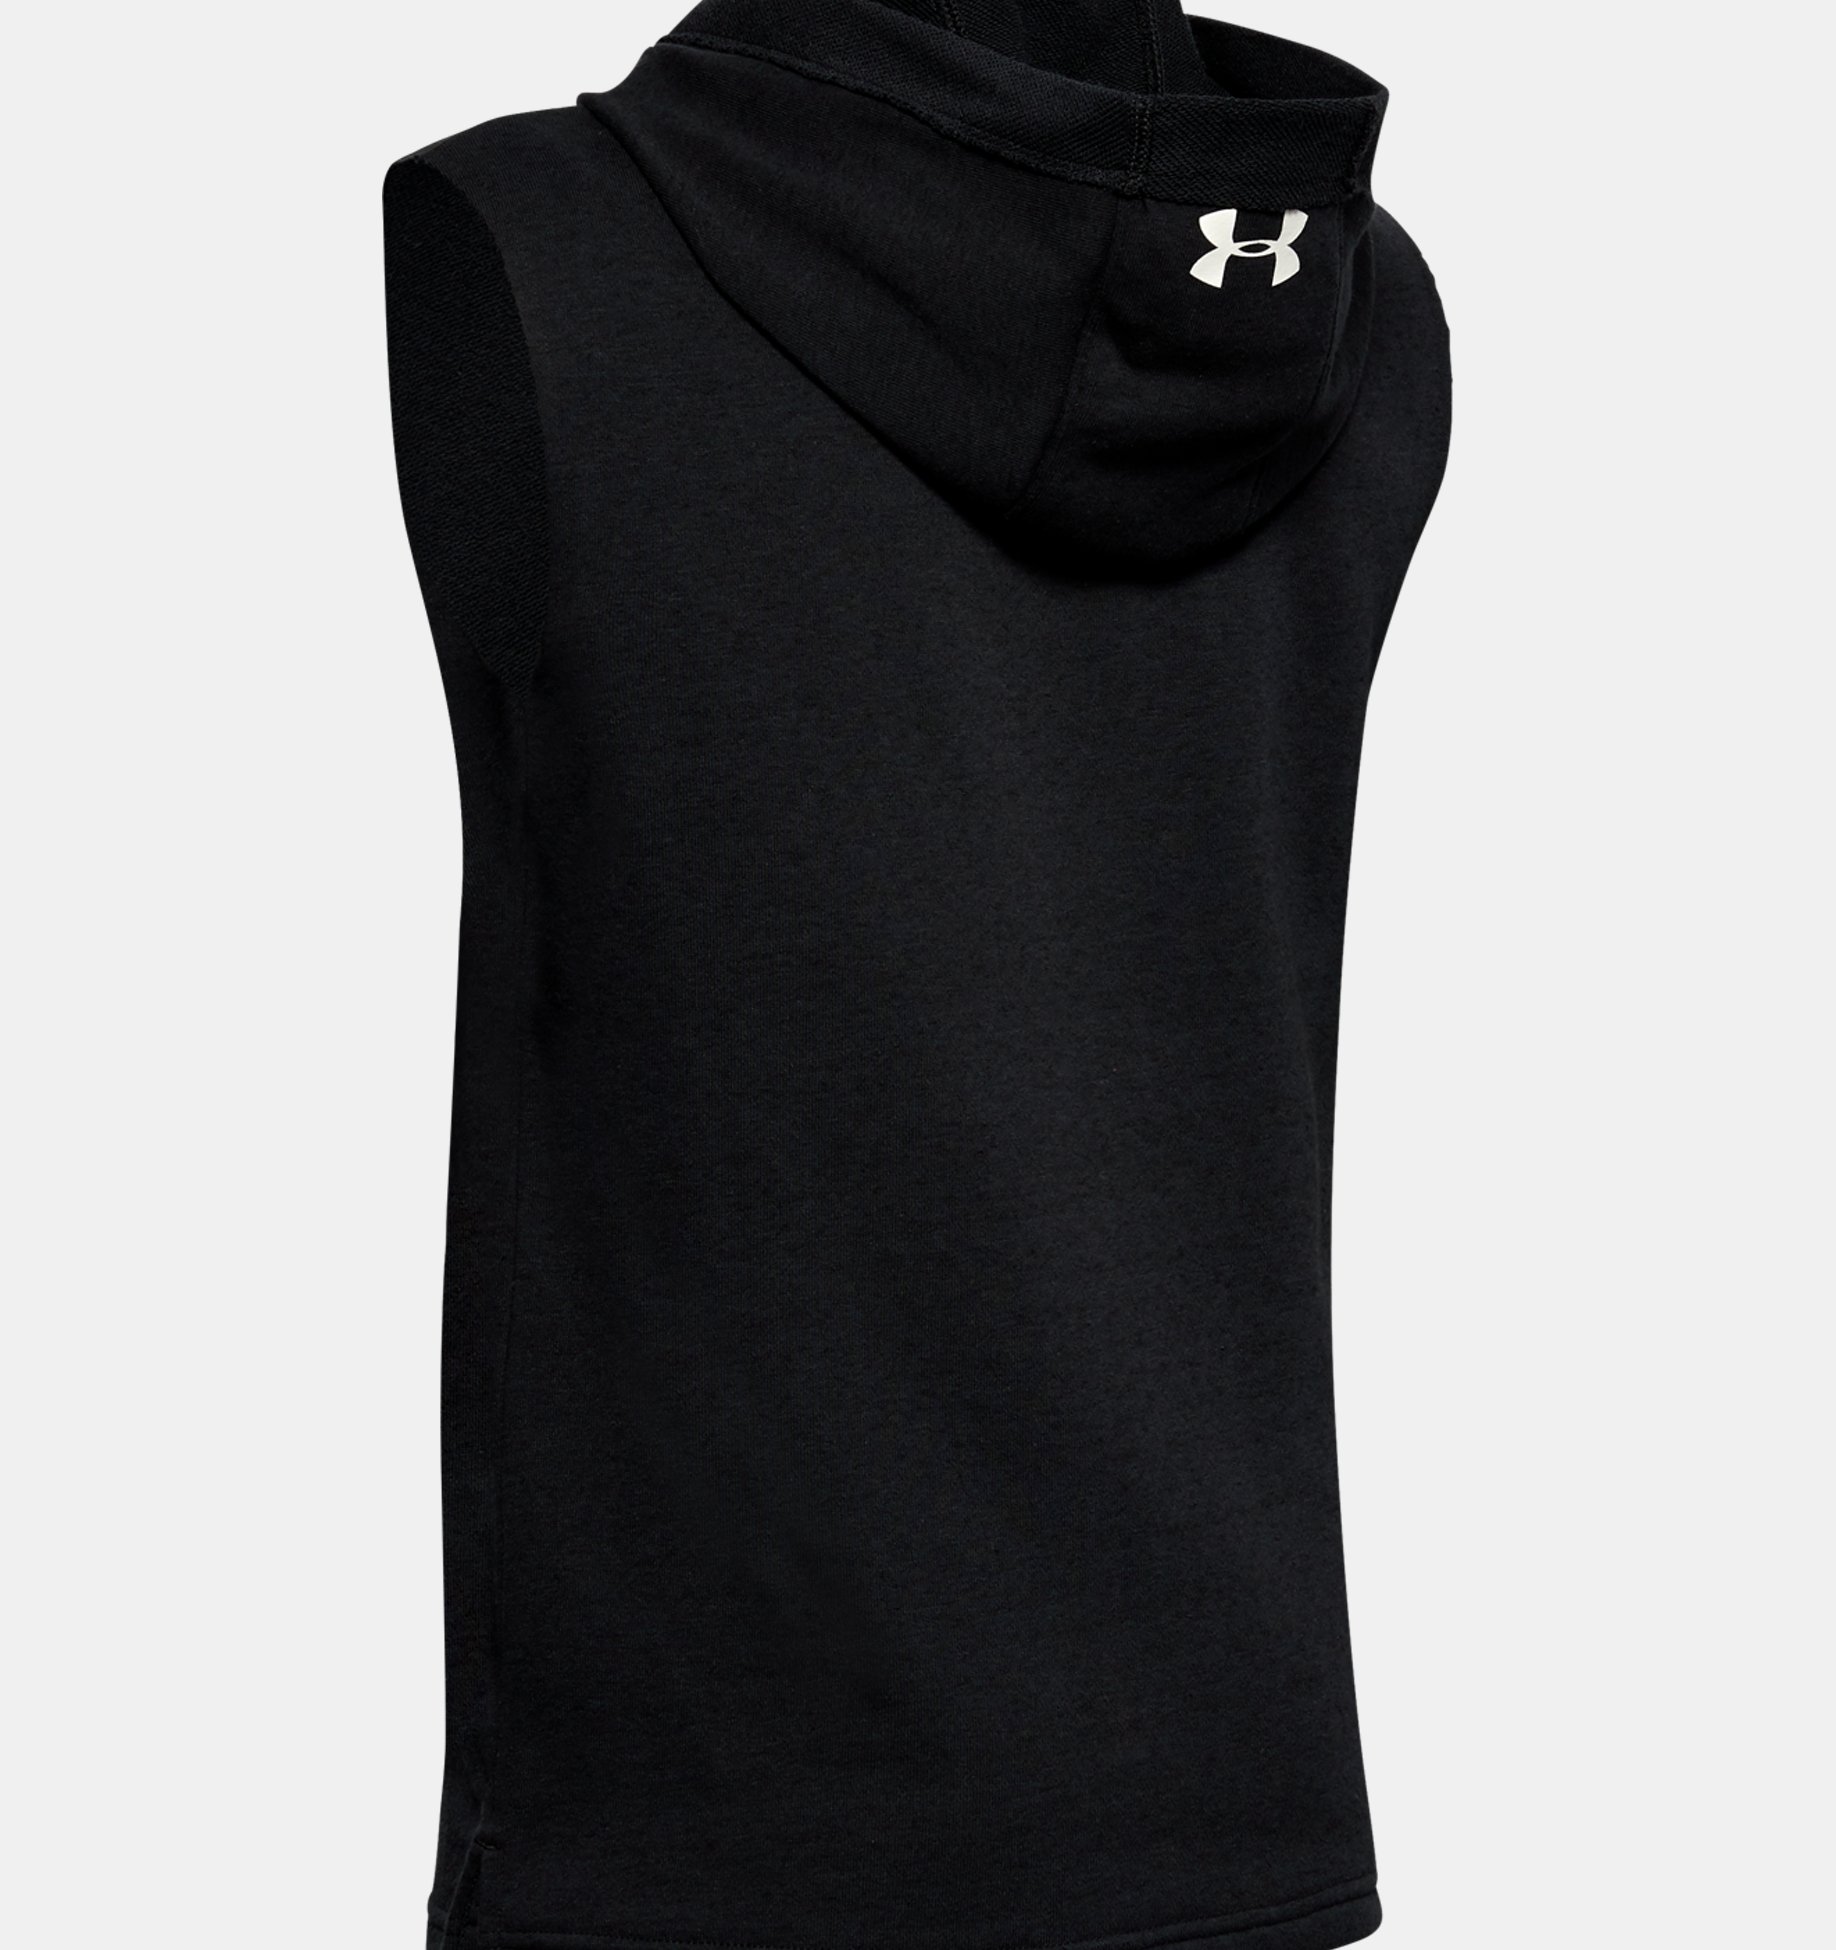 Under Armour Boy's Youth Project Rock Mana Sleeveless Hoodie Black 1351837 002